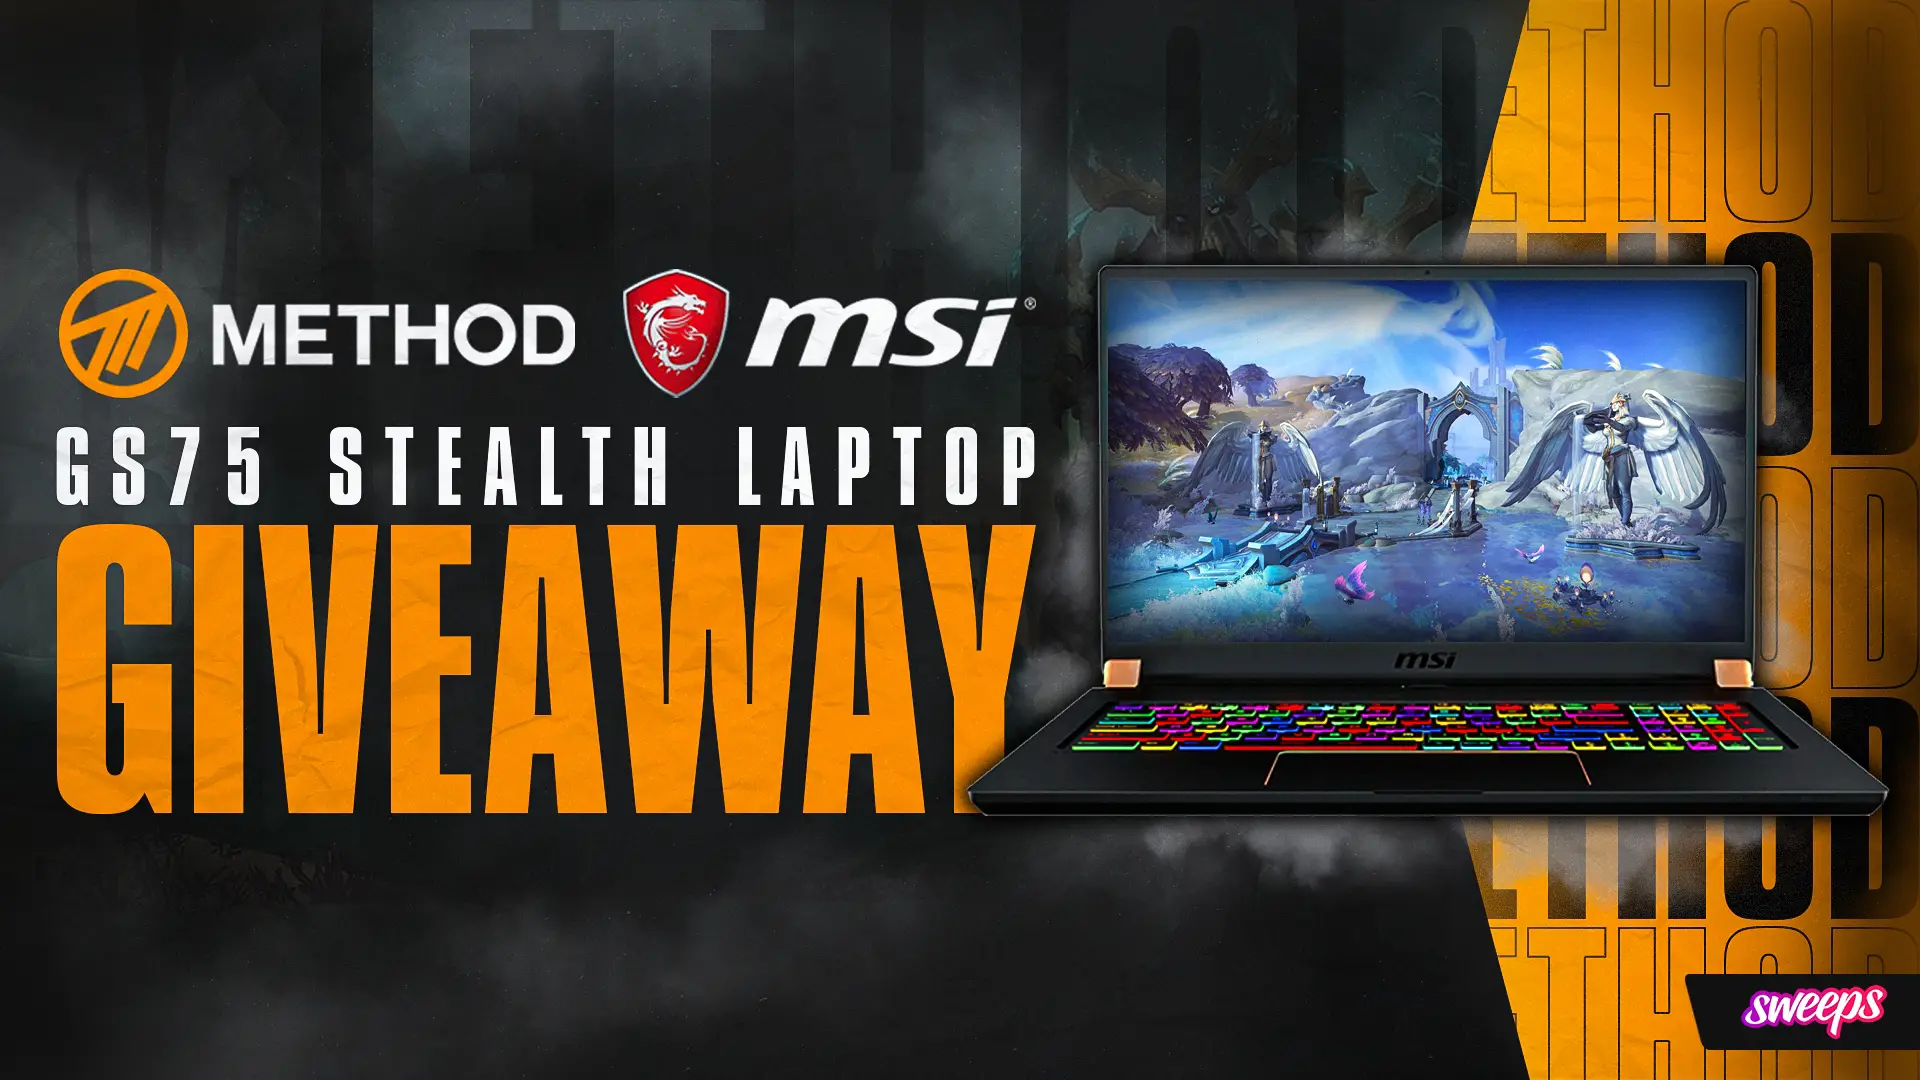 Enter for your chance to win a GS75 Stealth Gaming Laptop ($2,500 Retail Value). Method and MSI are excited to announce this GS75 Stealth Gaming Laptop giveaway. One winner will be drawn and notified via email to claim their prize and will also be announced on their Twitter page. 